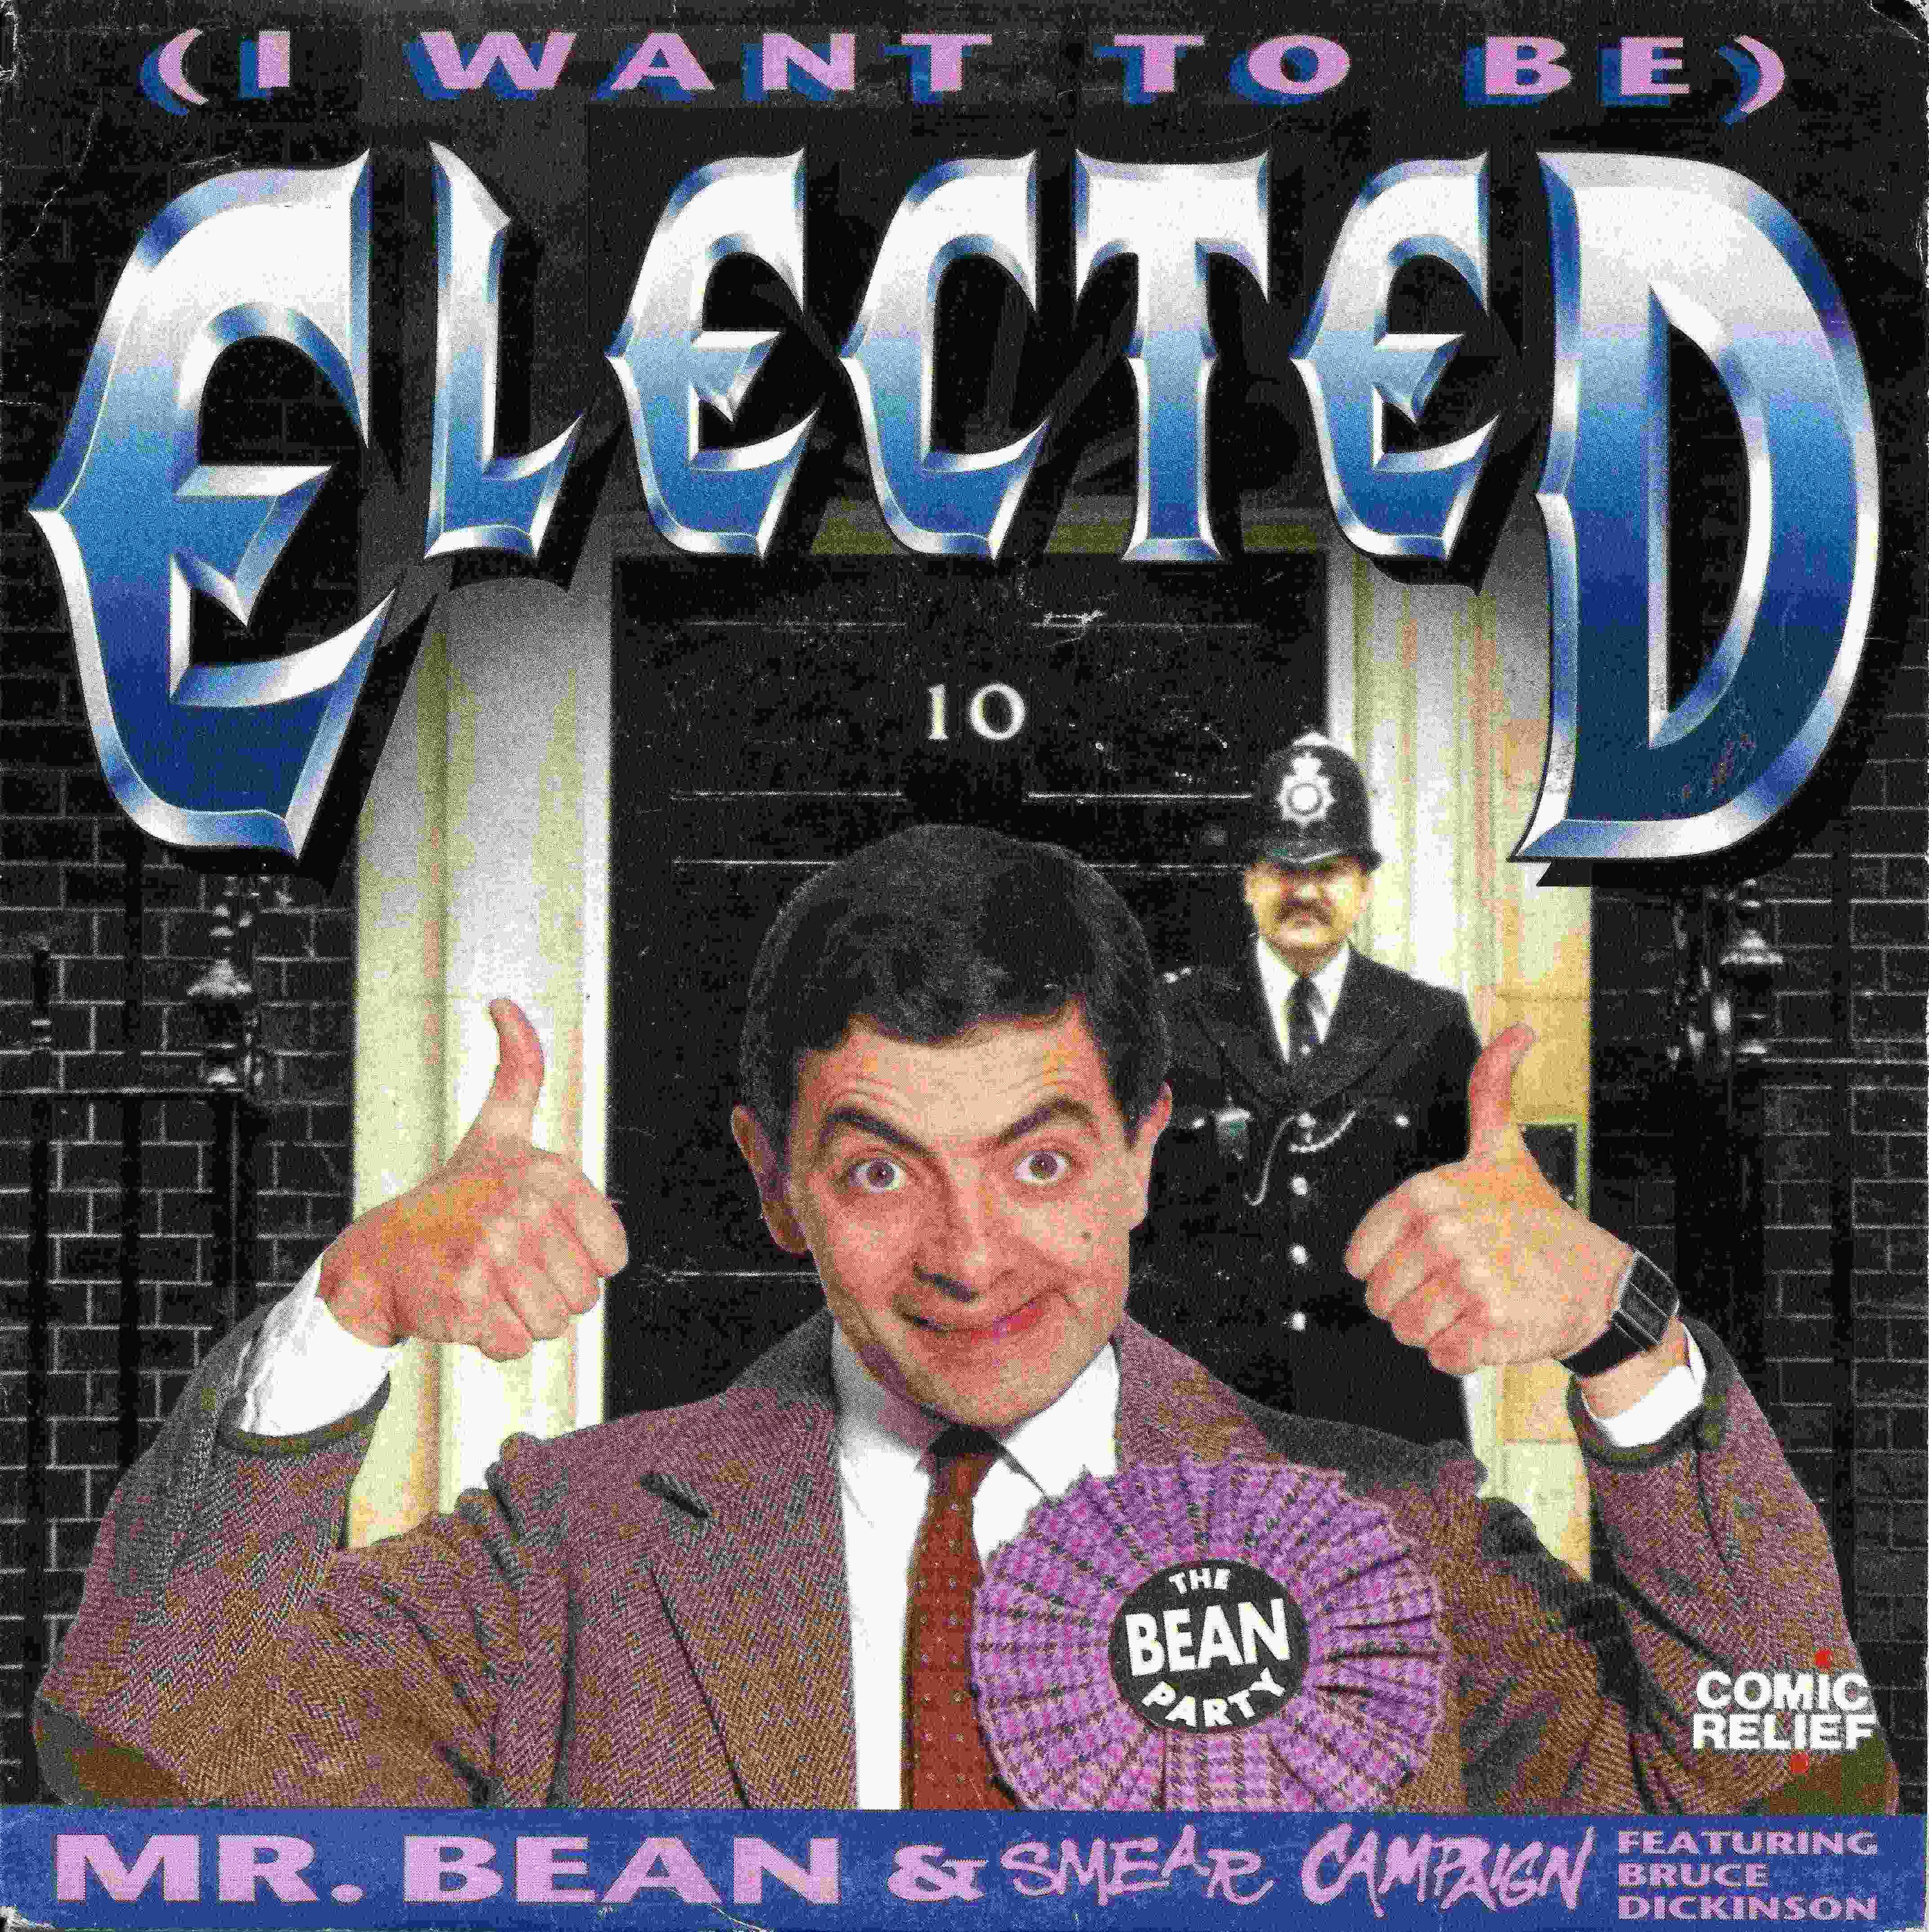 Picture of (I want to be) Elected by artist Mr. Bean / Smear Campaign from the BBC singles - Records and Tapes library